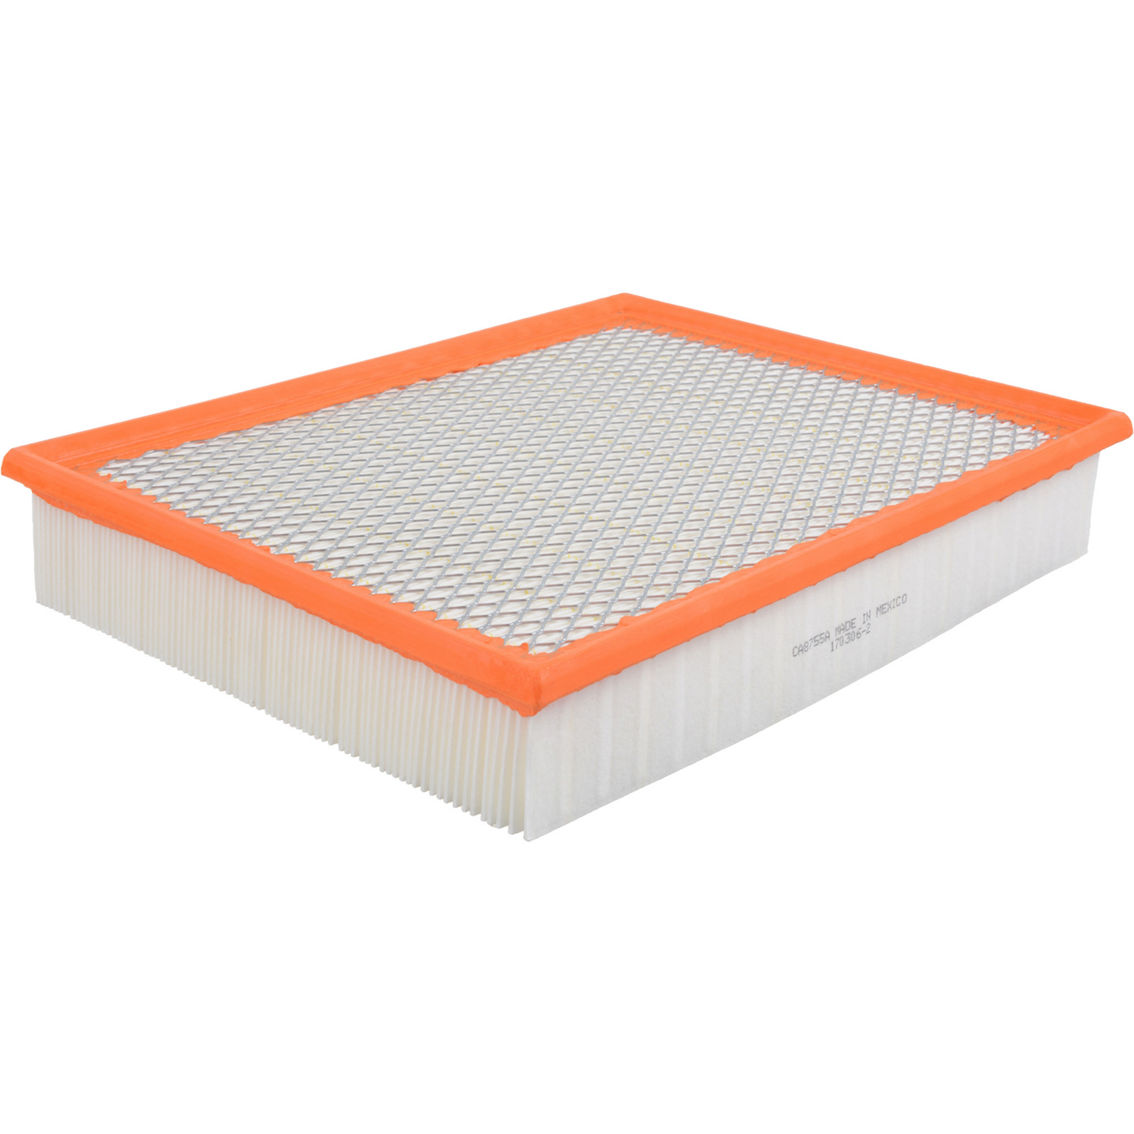 FRAM Extra Guard Flexible Panel Air Filter CA8755A - Image 2 of 4